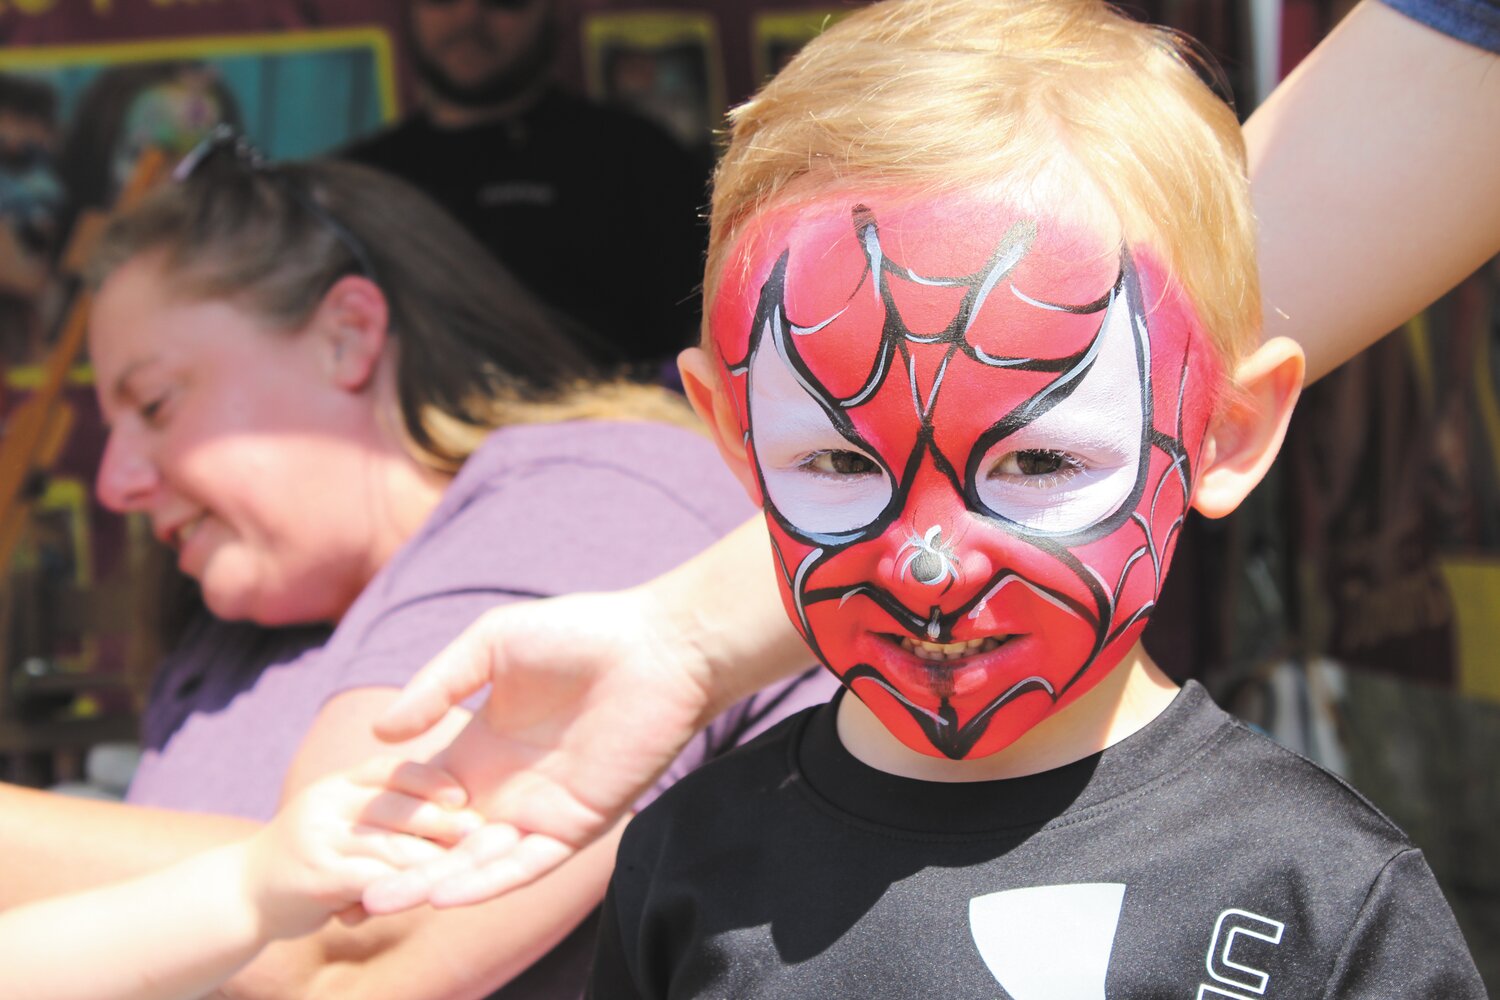 Waylon Oliver, 3, was all smiles after having his face painted to look like Spiderman.